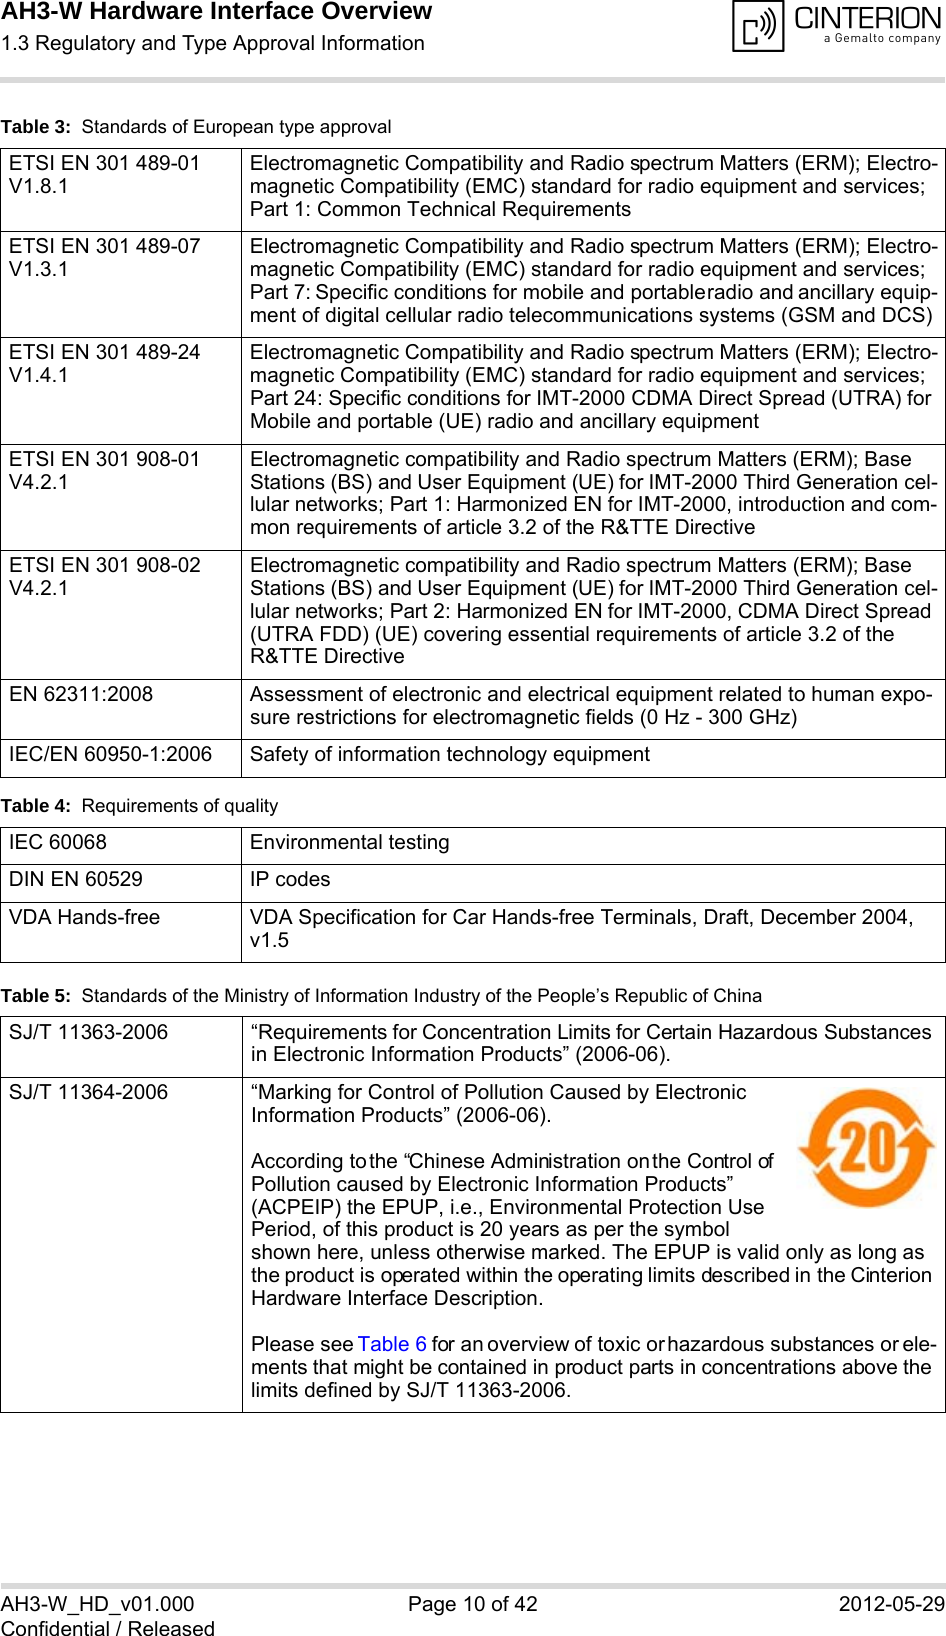 AH3-W Hardware Interface Overview1.3 Regulatory and Type Approval Information14AH3-W_HD_v01.000 Page 10 of 42 2012-05-29Confidential / ReleasedETSI EN 301 489-01 V1.8.1Electromagnetic Compatibility and Radio spectrum Matters (ERM); Electro-magnetic Compatibility (EMC) standard for radio equipment and services; Part 1: Common Technical RequirementsETSI EN 301 489-07 V1.3.1Electromagnetic Compatibility and Radio spectrum Matters (ERM); Electro-magnetic Compatibility (EMC) standard for radio equipment and services; Part 7: Specific conditions for mobile and portable radio and ancillary equip-ment of digital cellular radio telecommunications systems (GSM and DCS)ETSI EN 301 489-24 V1.4.1Electromagnetic Compatibility and Radio spectrum Matters (ERM); Electro-magnetic Compatibility (EMC) standard for radio equipment and services; Part 24: Specific conditions for IMT-2000 CDMA Direct Spread (UTRA) for Mobile and portable (UE) radio and ancillary equipmentETSI EN 301 908-01 V4.2.1Electromagnetic compatibility and Radio spectrum Matters (ERM); Base Stations (BS) and User Equipment (UE) for IMT-2000 Third Generation cel-lular networks; Part 1: Harmonized EN for IMT-2000, introduction and com-mon requirements of article 3.2 of the R&amp;TTE DirectiveETSI EN 301 908-02 V4.2.1Electromagnetic compatibility and Radio spectrum Matters (ERM); Base Stations (BS) and User Equipment (UE) for IMT-2000 Third Generation cel-lular networks; Part 2: Harmonized EN for IMT-2000, CDMA Direct Spread (UTRA FDD) (UE) covering essential requirements of article 3.2 of the R&amp;TTE DirectiveEN 62311:2008 Assessment of electronic and electrical equipment related to human expo-sure restrictions for electromagnetic fields (0 Hz - 300 GHz)IEC/EN 60950-1:2006 Safety of information technology equipmentTable 4:  Requirements of qualityIEC 60068 Environmental testingDIN EN 60529 IP codesVDA Hands-free  VDA Specification for Car Hands-free Terminals, Draft, December 2004, v1.5Table 5:  Standards of the Ministry of Information Industry of the People’s Republic of ChinaSJ/T 11363-2006  “Requirements for Concentration Limits for Certain Hazardous Substances in Electronic Information Products” (2006-06).SJ/T 11364-2006 “Marking for Control of Pollution Caused by Electronic Information Products” (2006-06).According to the “Chinese Administration on the Control of Pollution caused by Electronic Information Products” (ACPEIP) the EPUP, i.e., Environmental Protection Use Period, of this product is 20 years as per the symbol shown here, unless otherwise marked. The EPUP is valid only as long as the product is operated within the operating limits described in the Cinterion Hardware Interface Description.Please see Table 6 for an overview of toxic or hazardous substances or ele-ments that might be contained in product parts in concentrations above the limits defined by SJ/T 11363-2006. Table 3:  Standards of European type approval